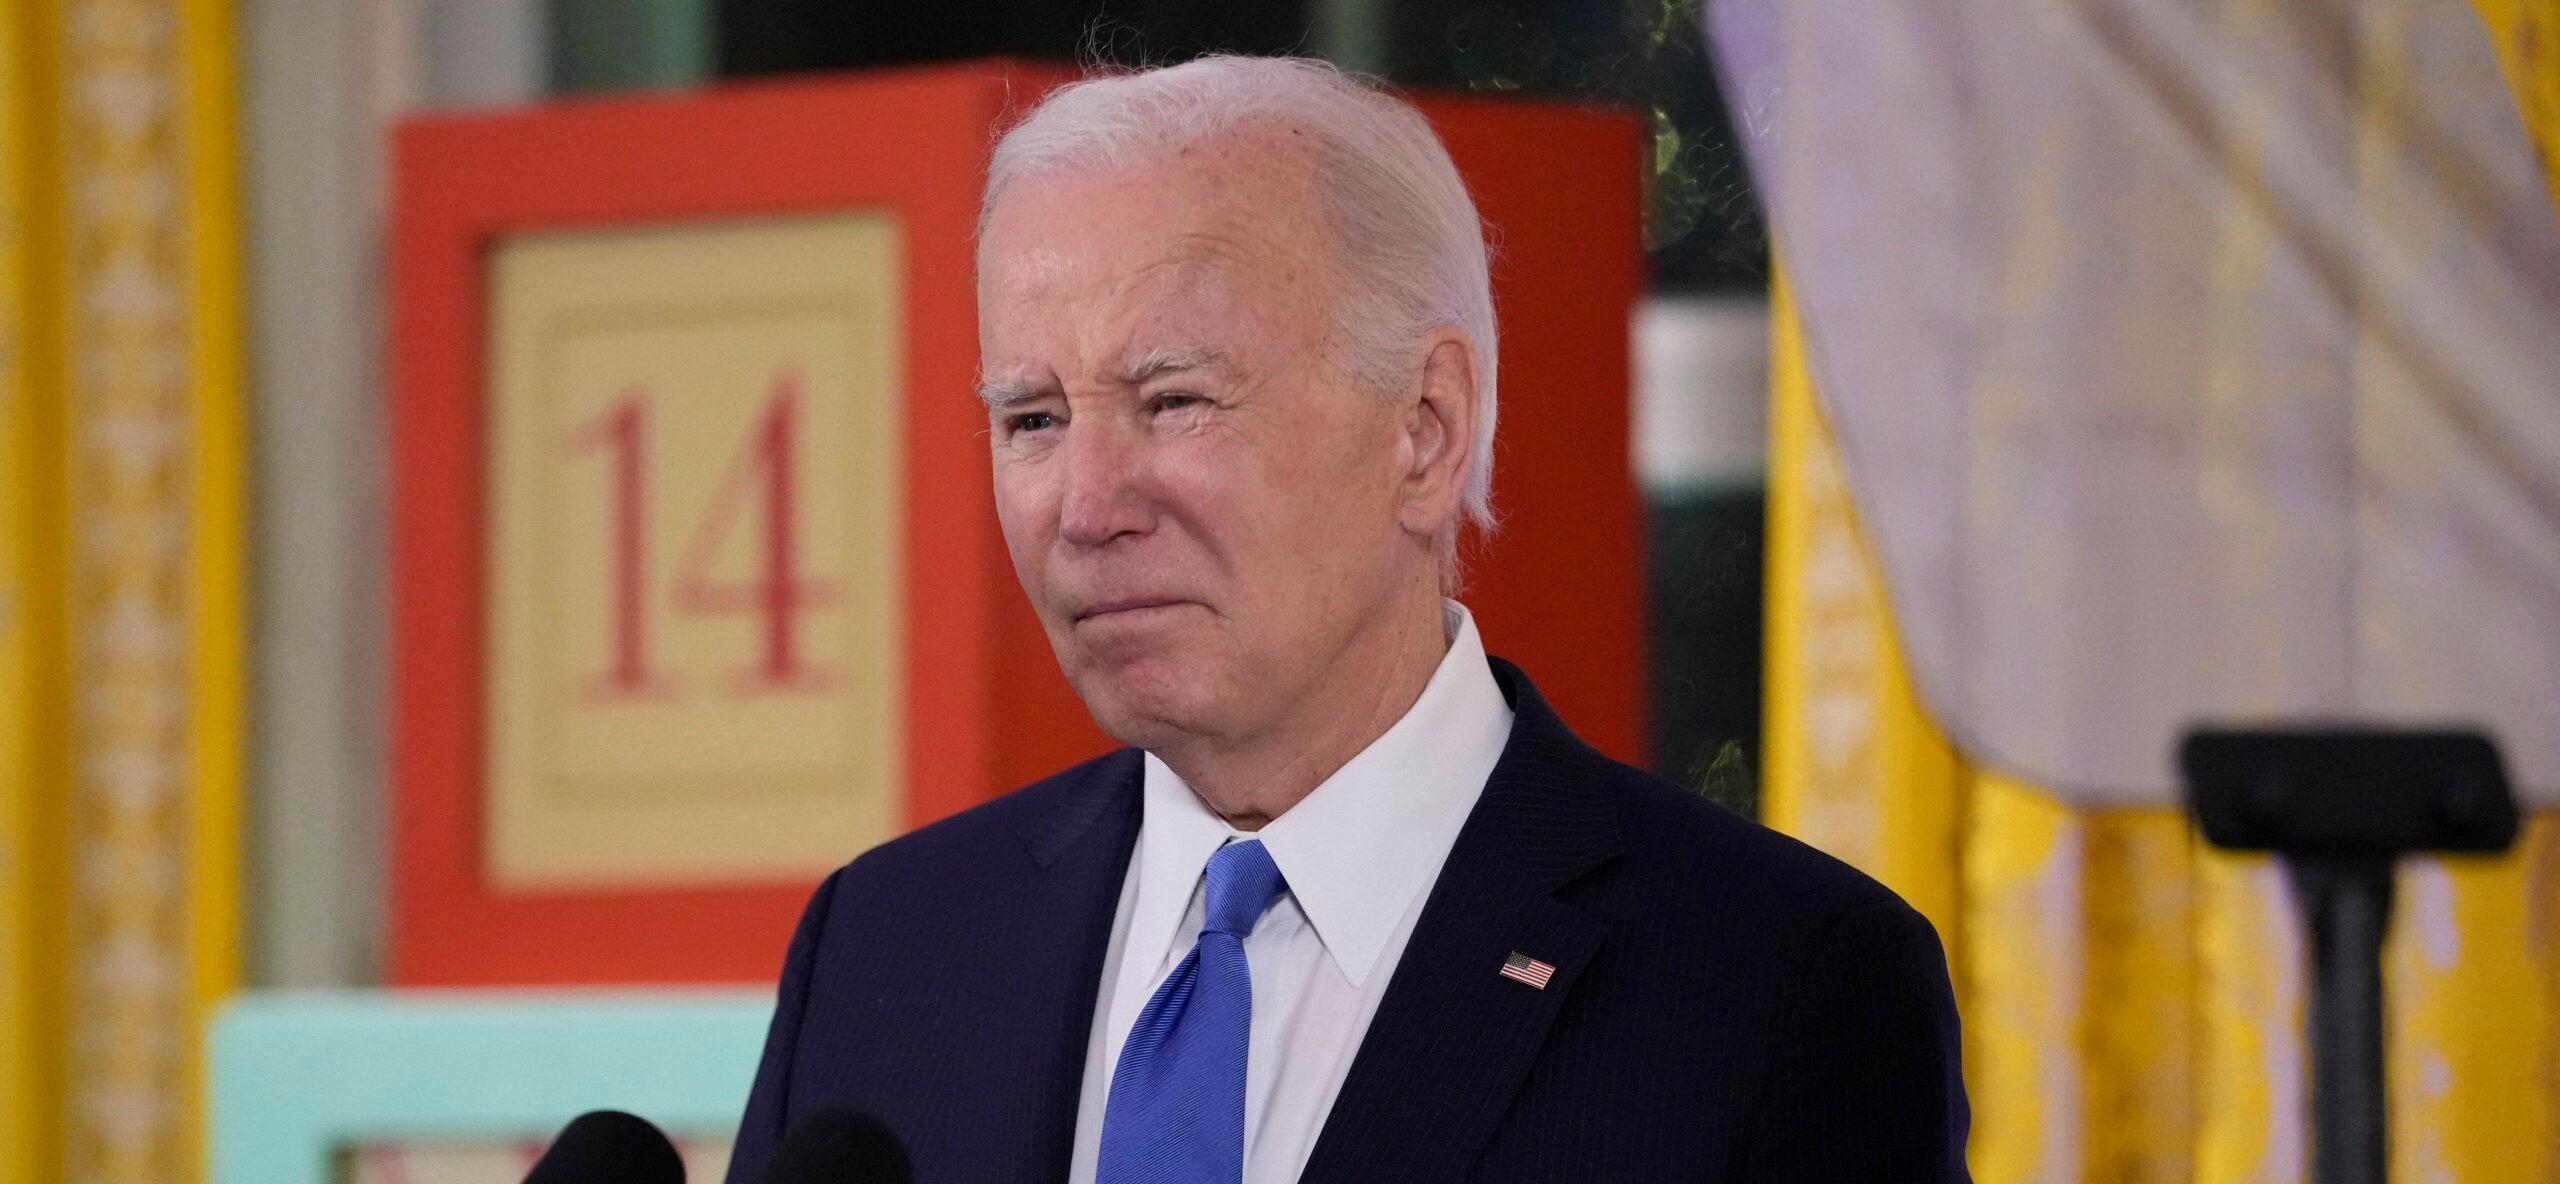 Joe Biden Slammed After Confusing French President With His Dead Predecessor